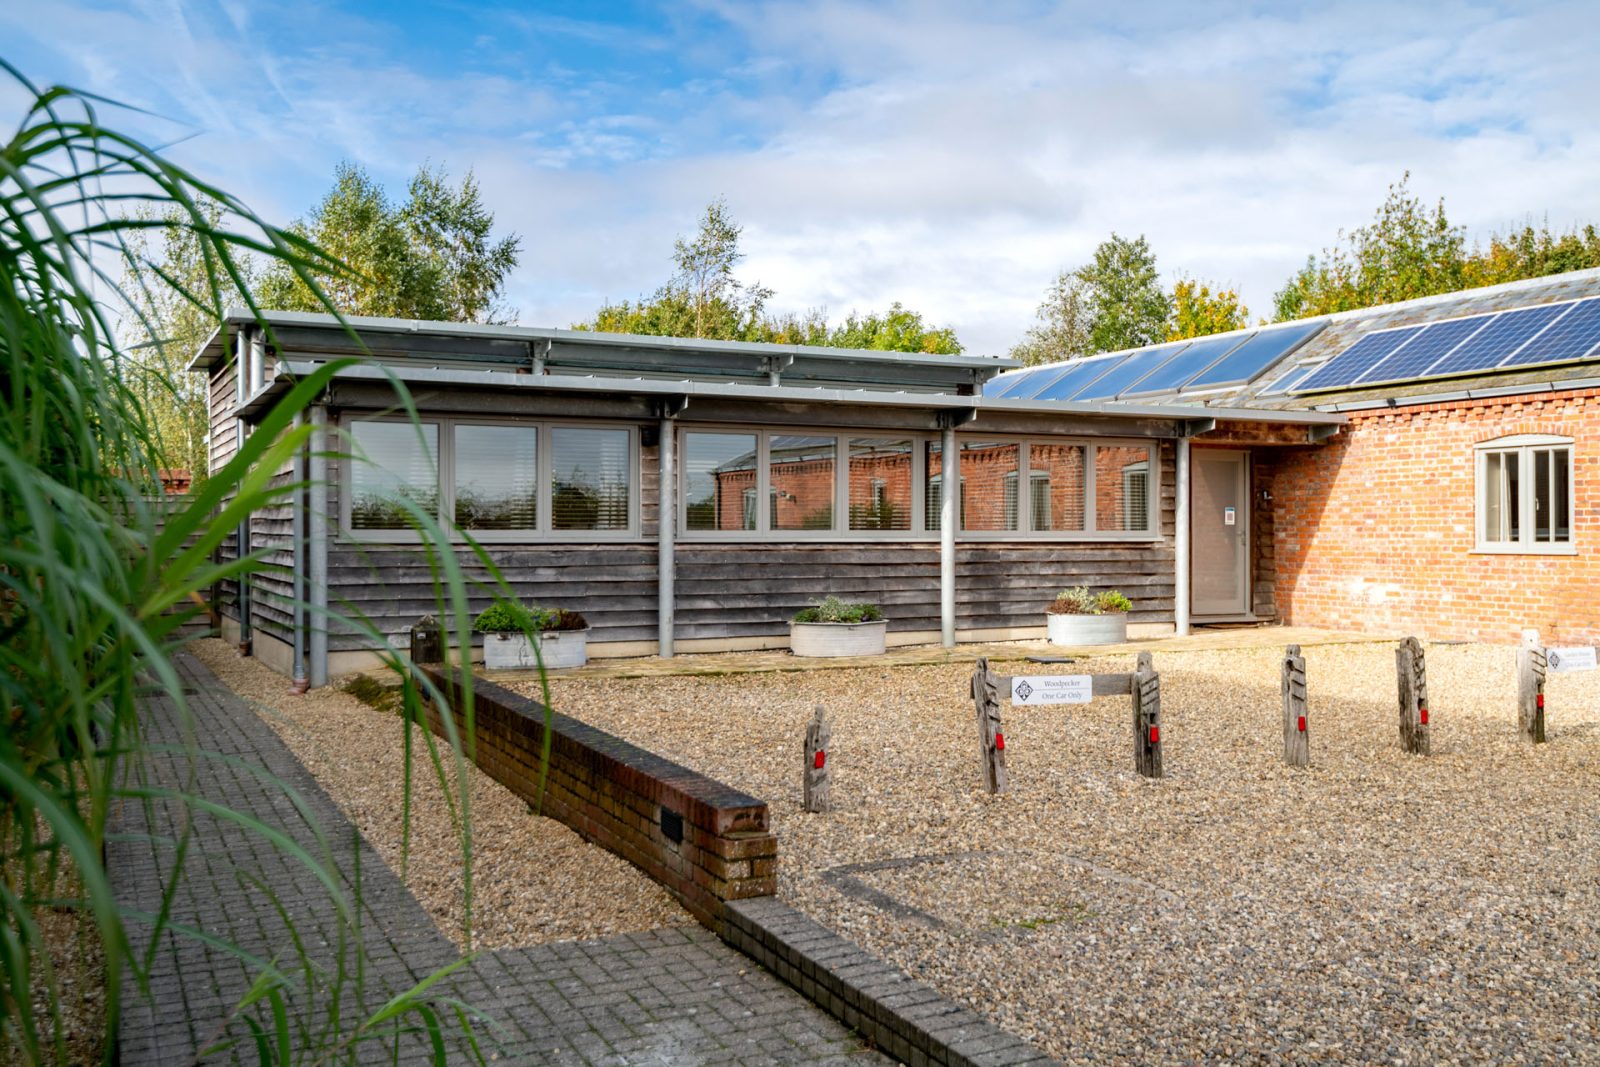 Eco Holiday Barns In Norfolk With Onsite EV Chargers